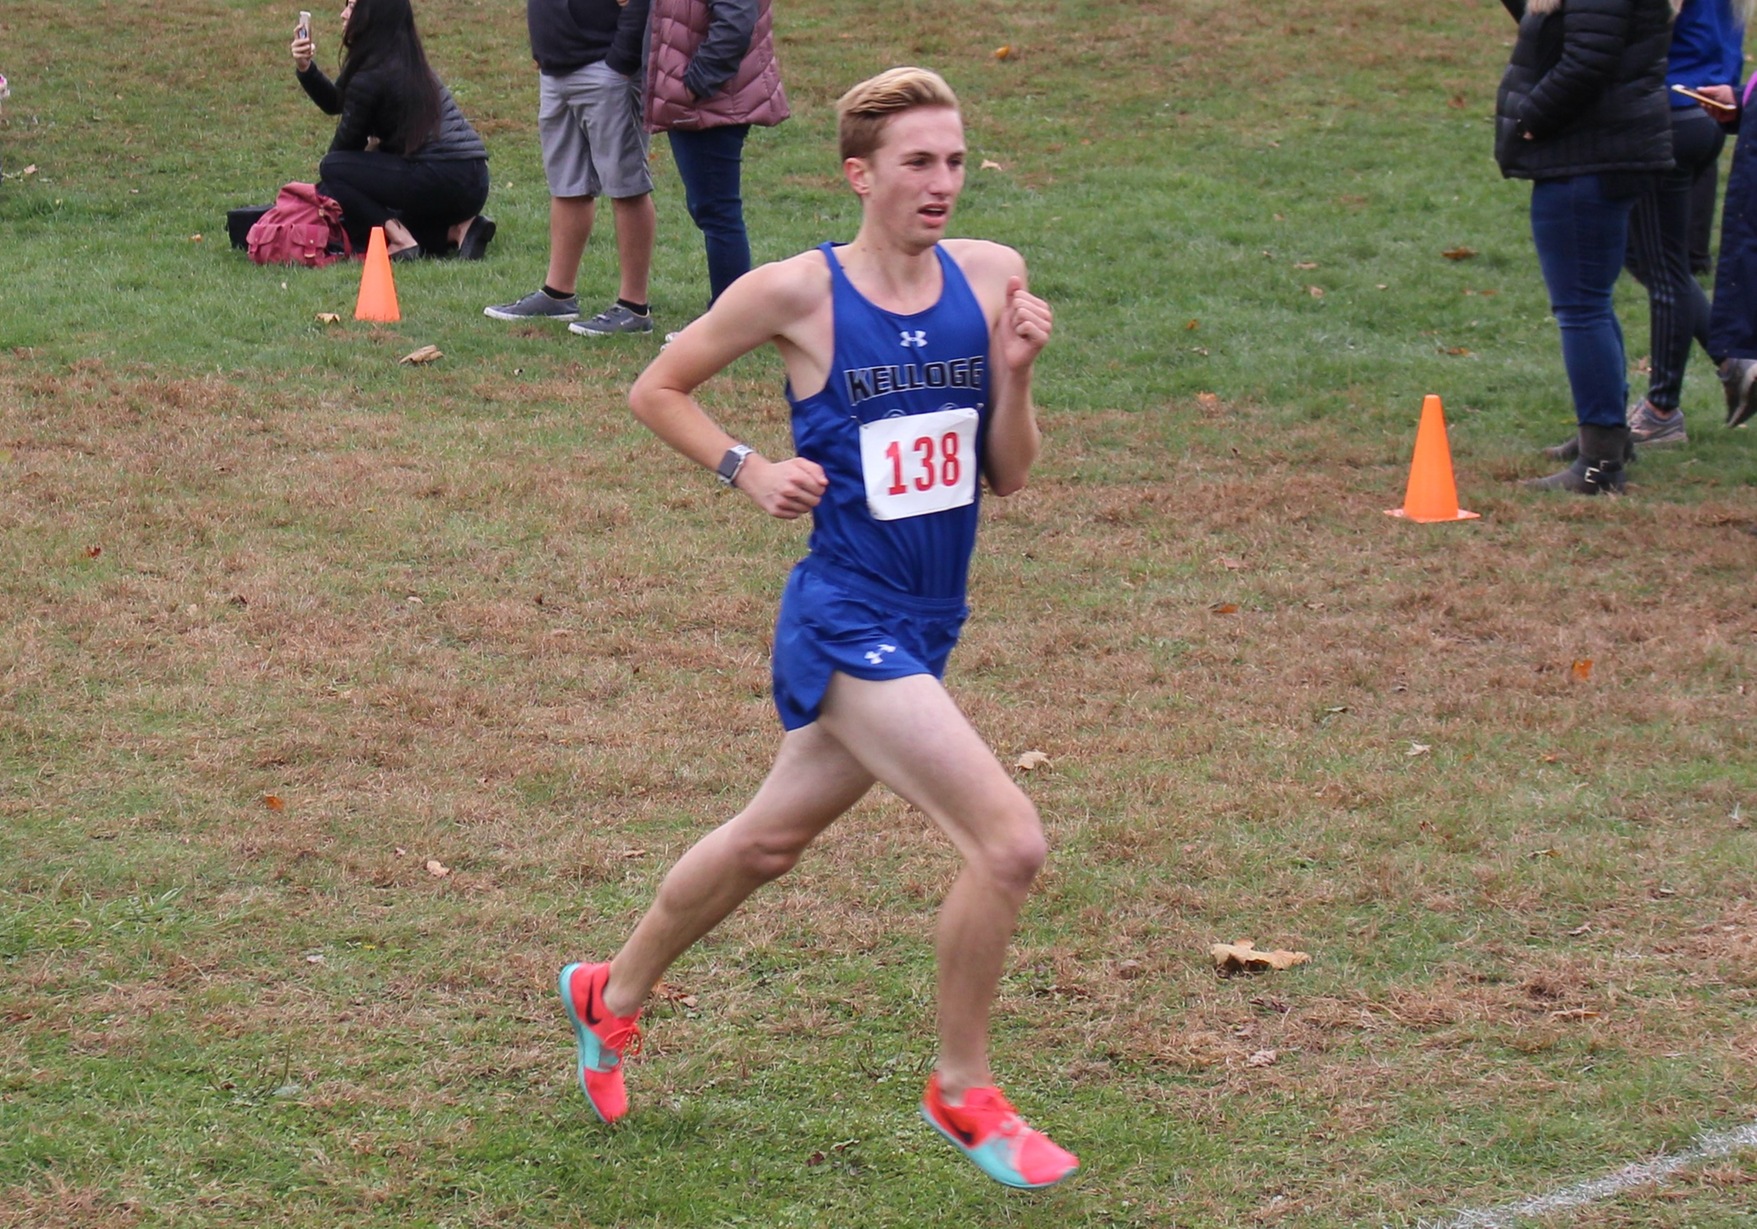 2019 NJCAA Region XII Division III Men's Cross Country Individual Champion: Kyle Roach